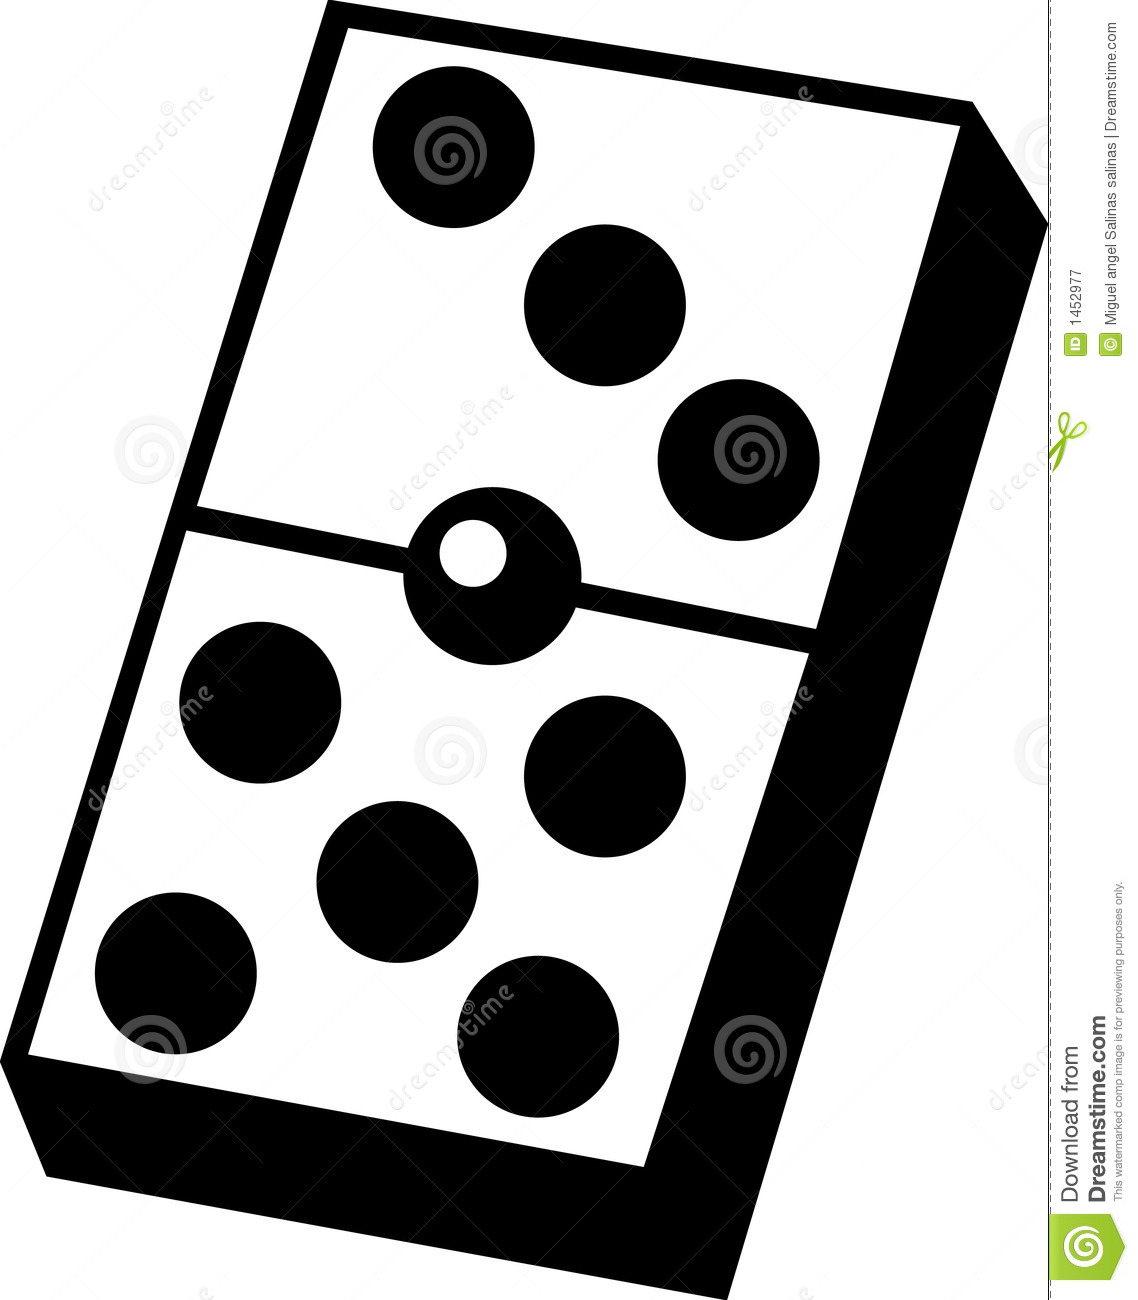 Displaying 16  Images For   Dominoes Clipart   